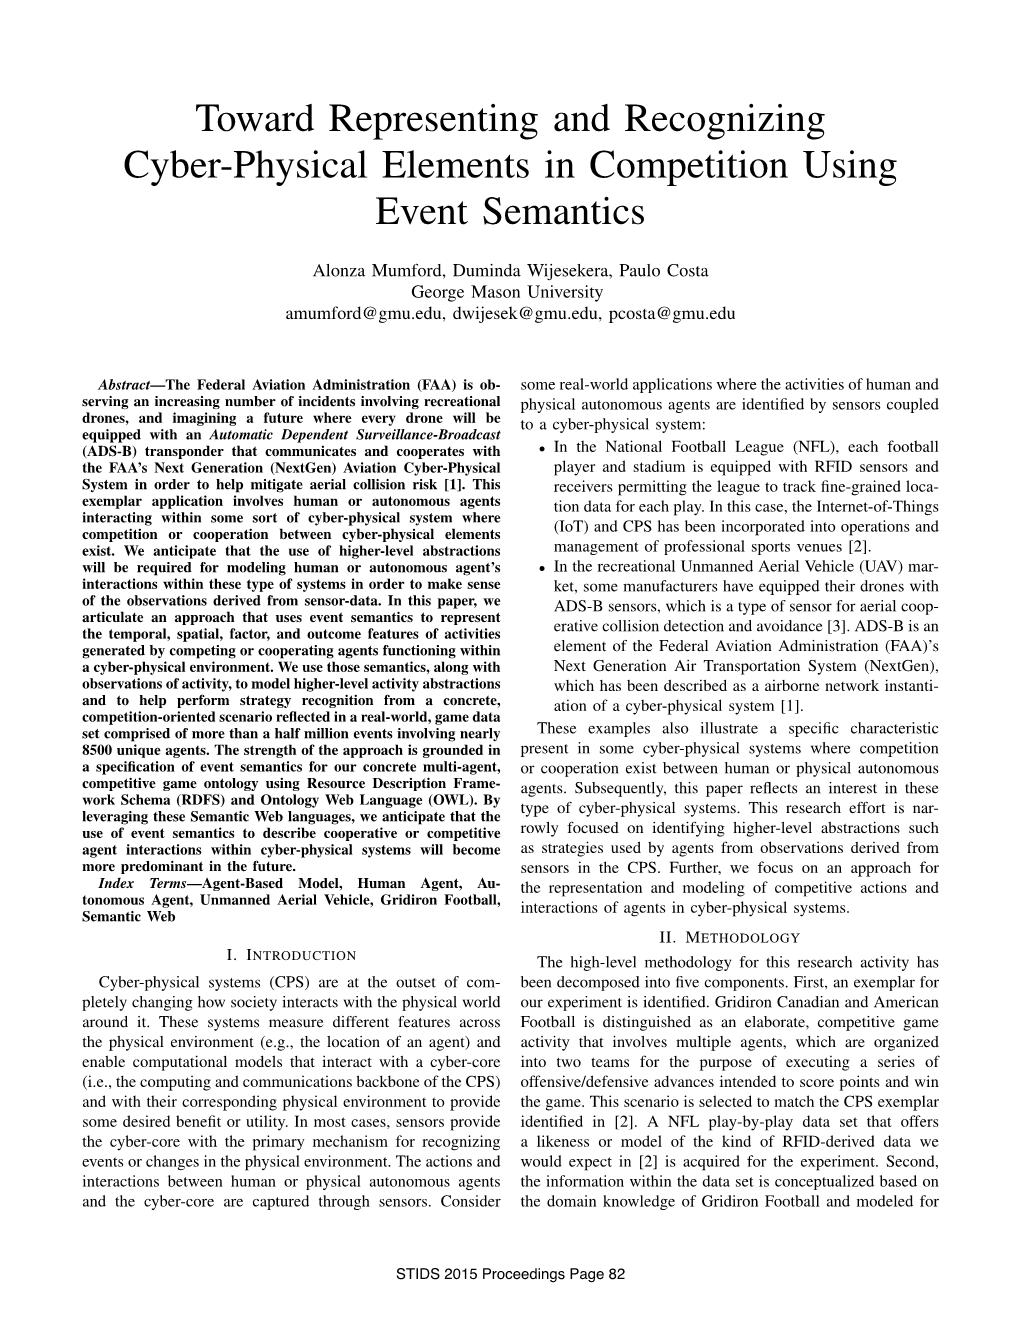 Toward Representing and Recognizing Cyber-Physical Elements in Competition Using Event Semantics